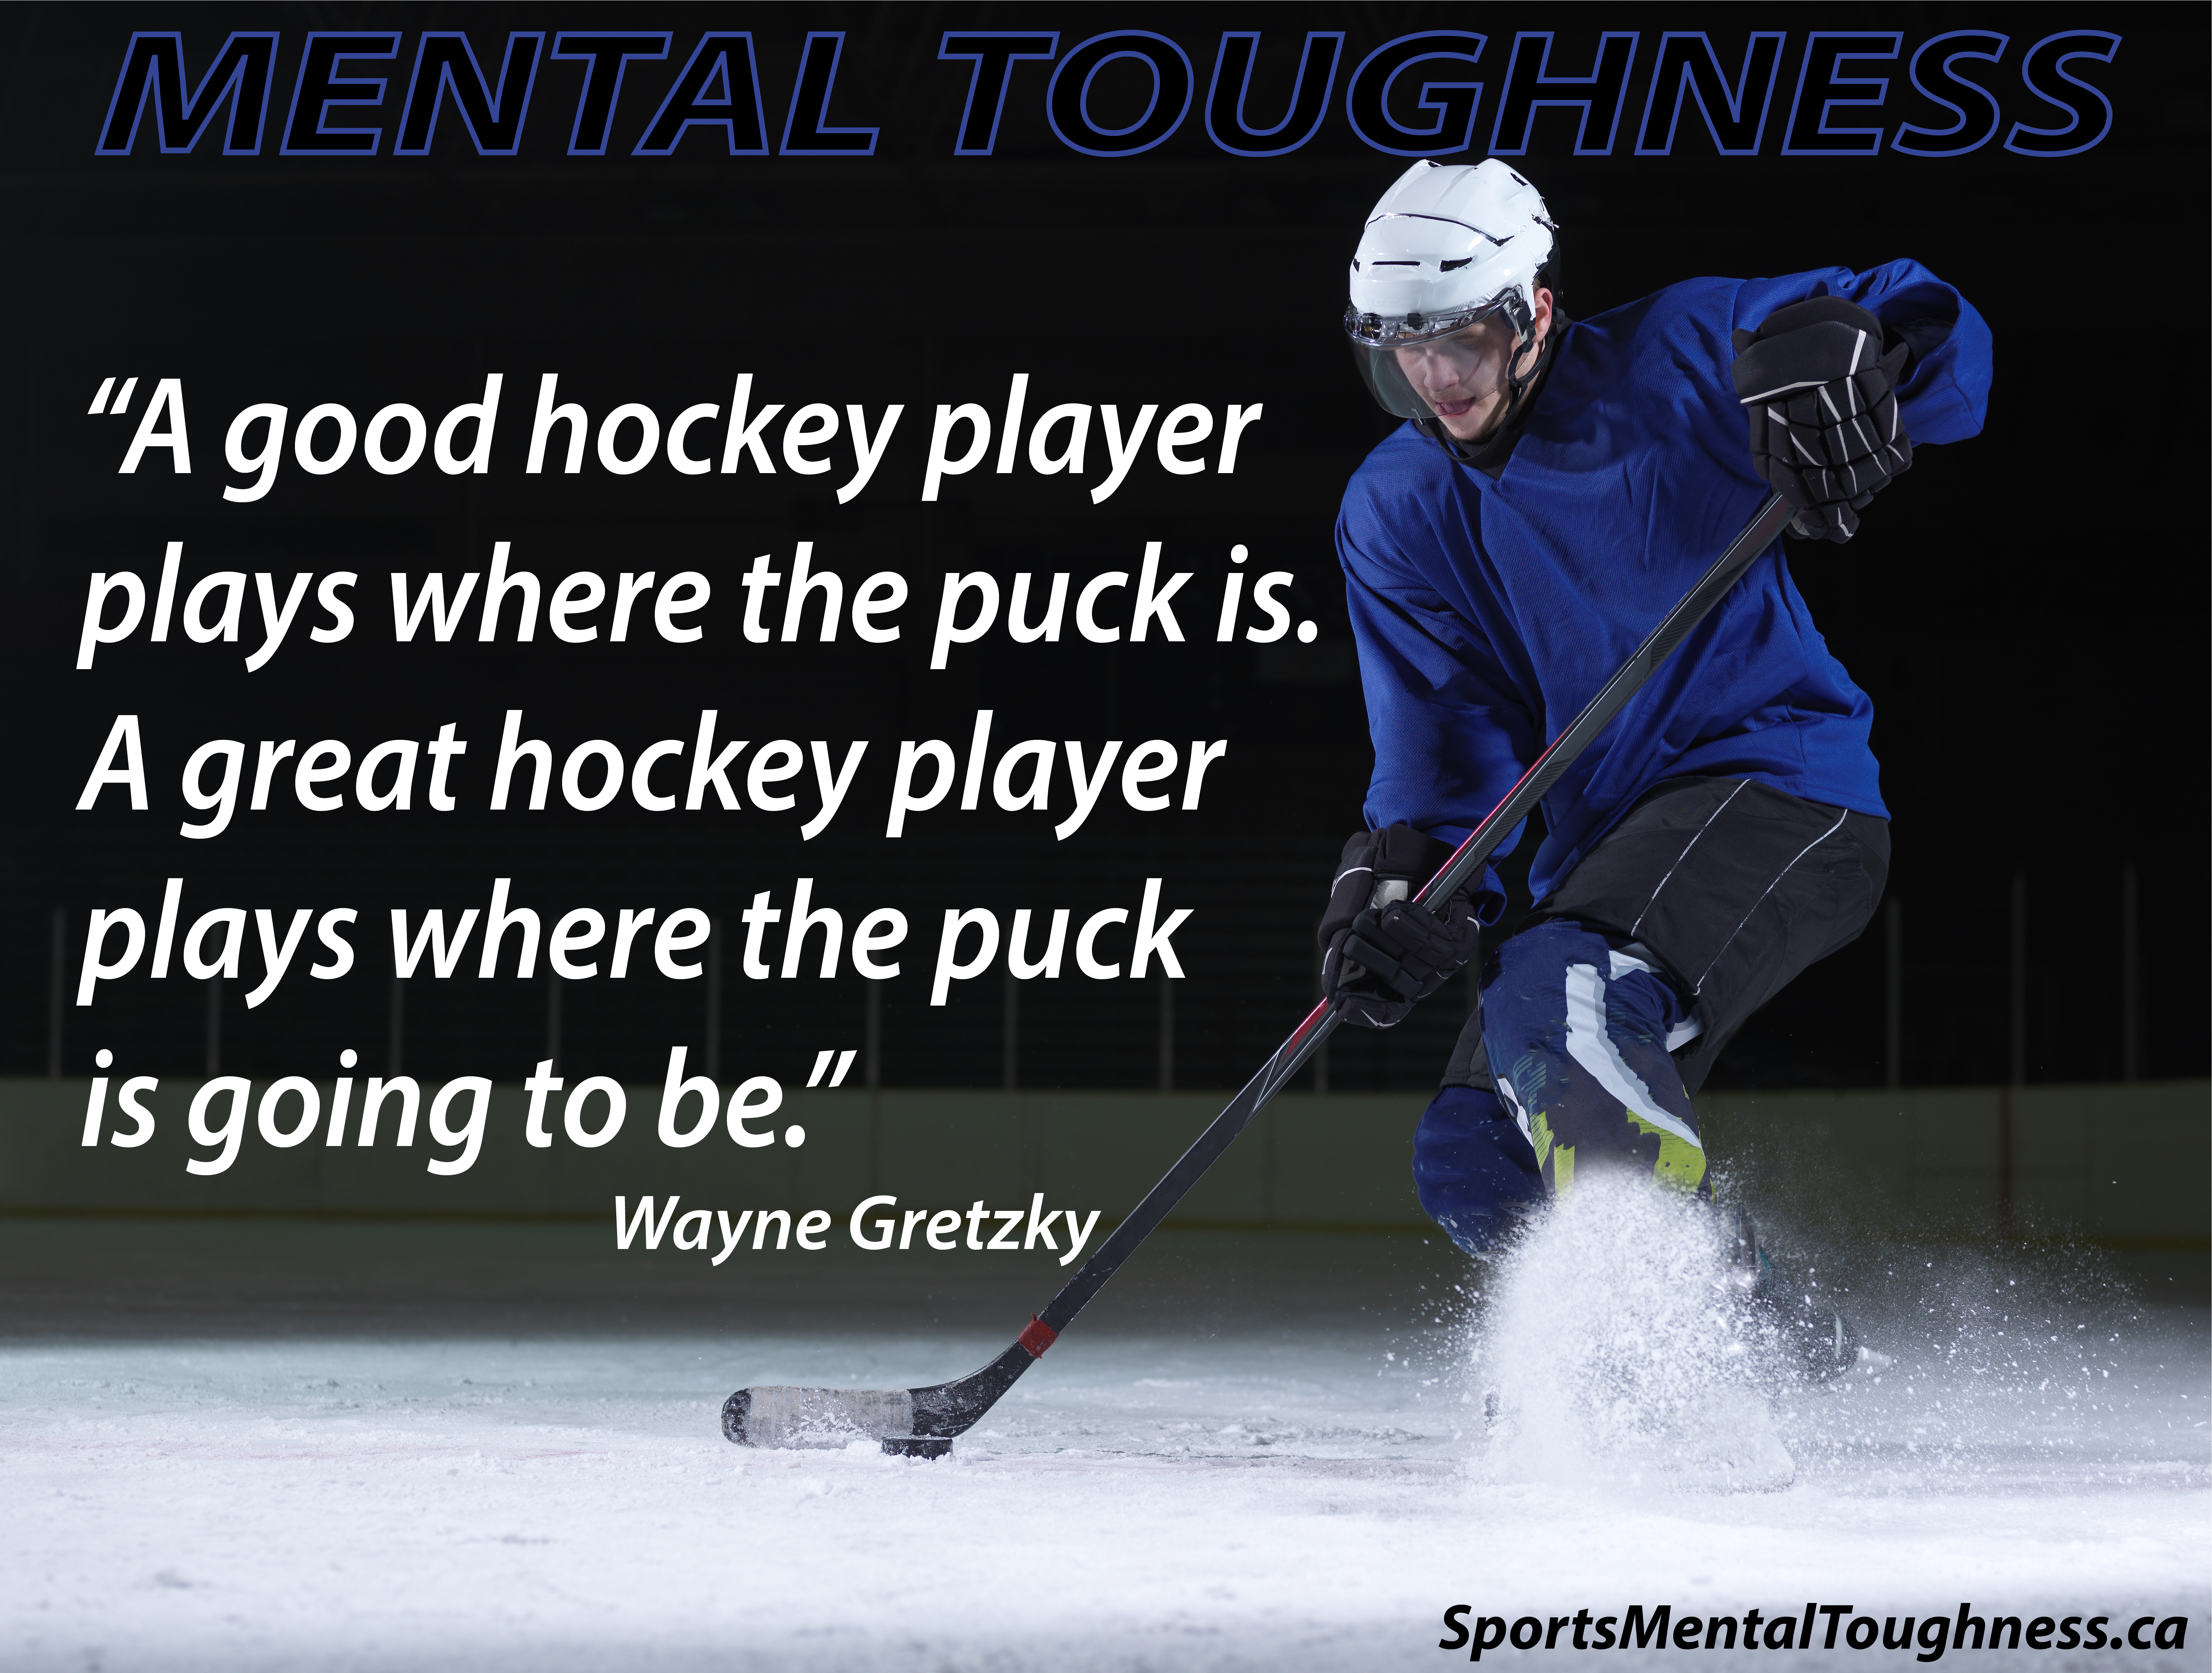 A good hockey player plays where the puck is. A great hockey player plays where the puck is going to be.